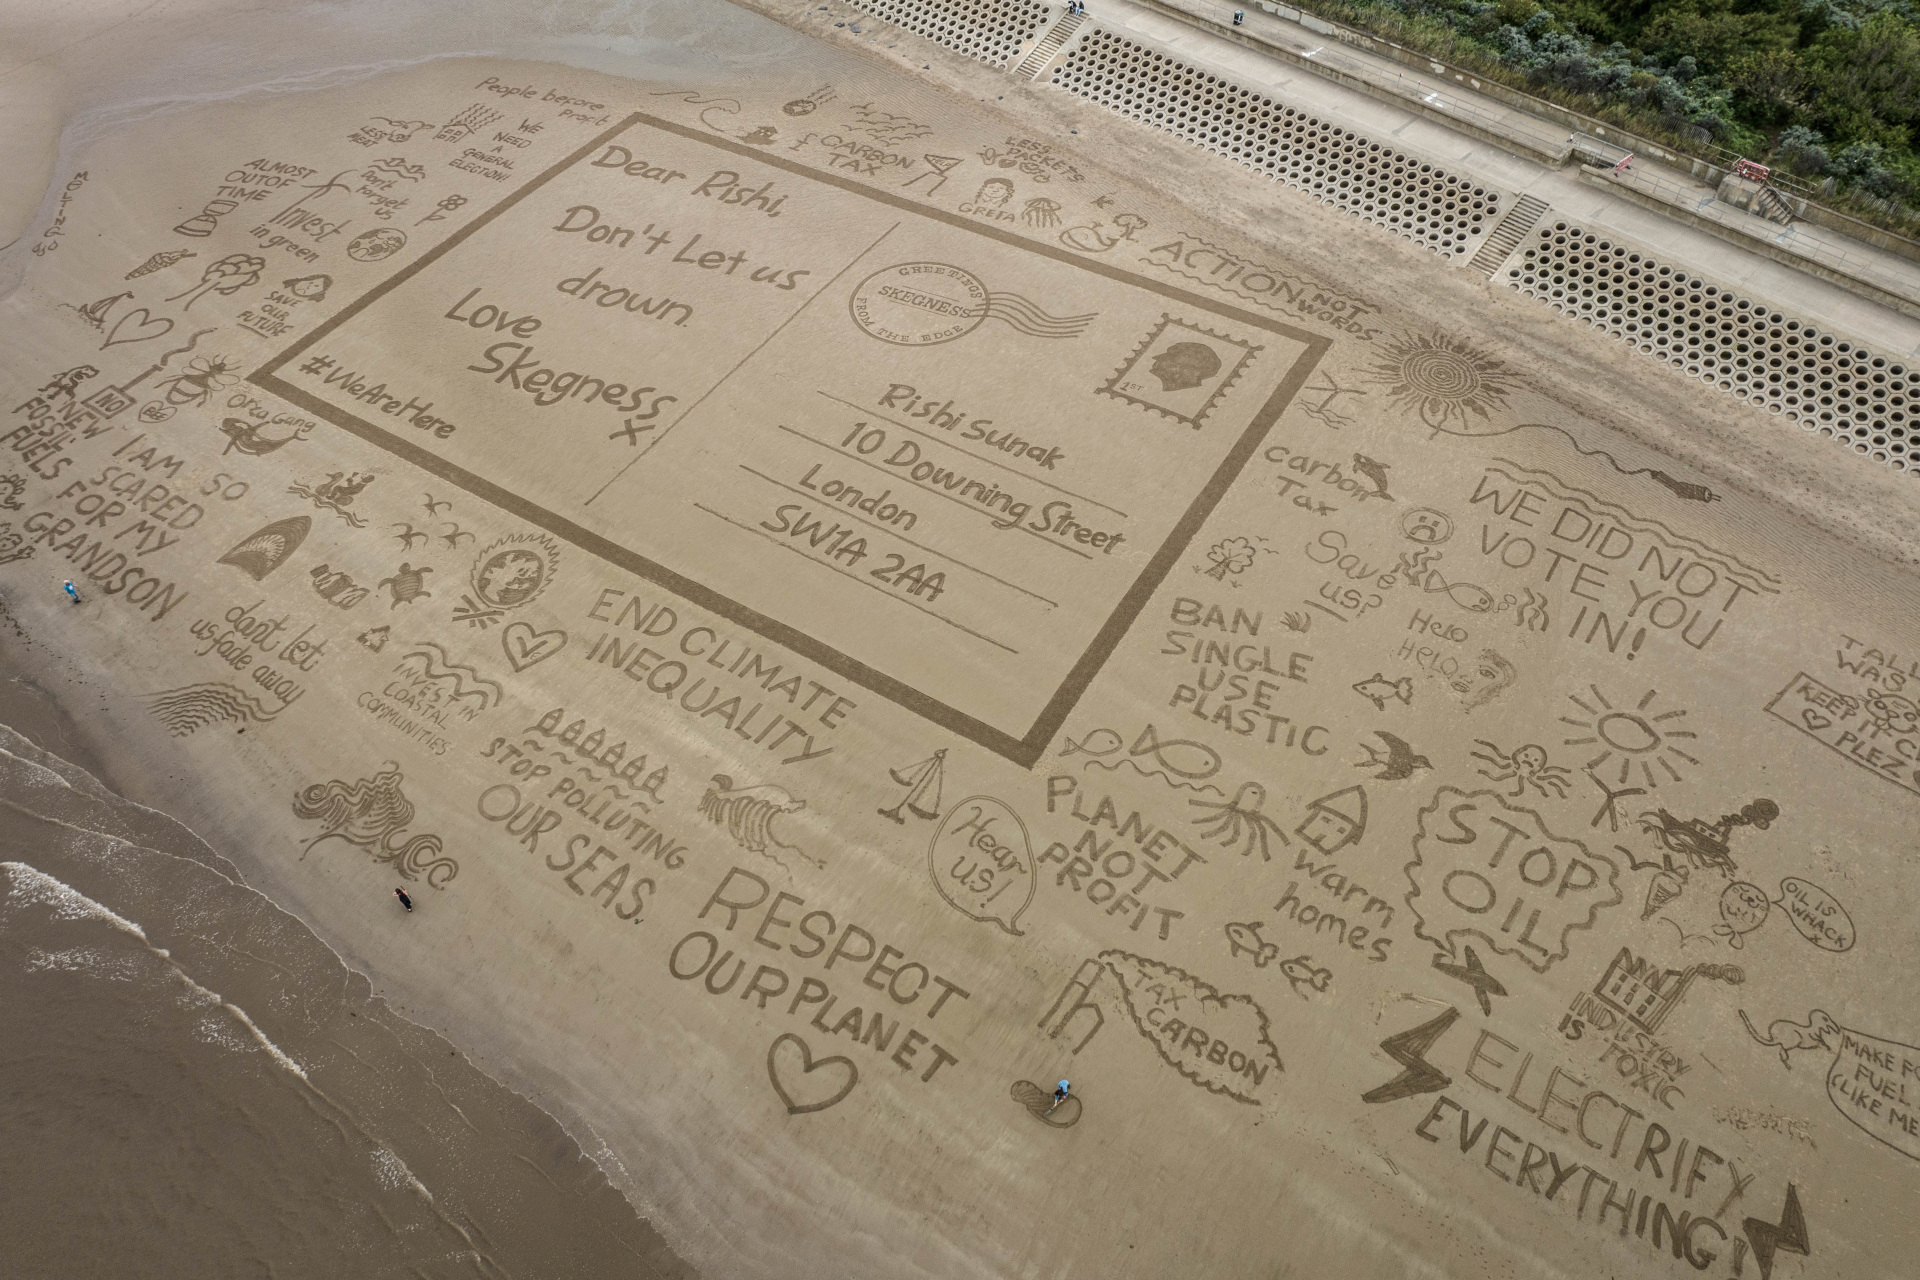 Postcard drawn in the sand